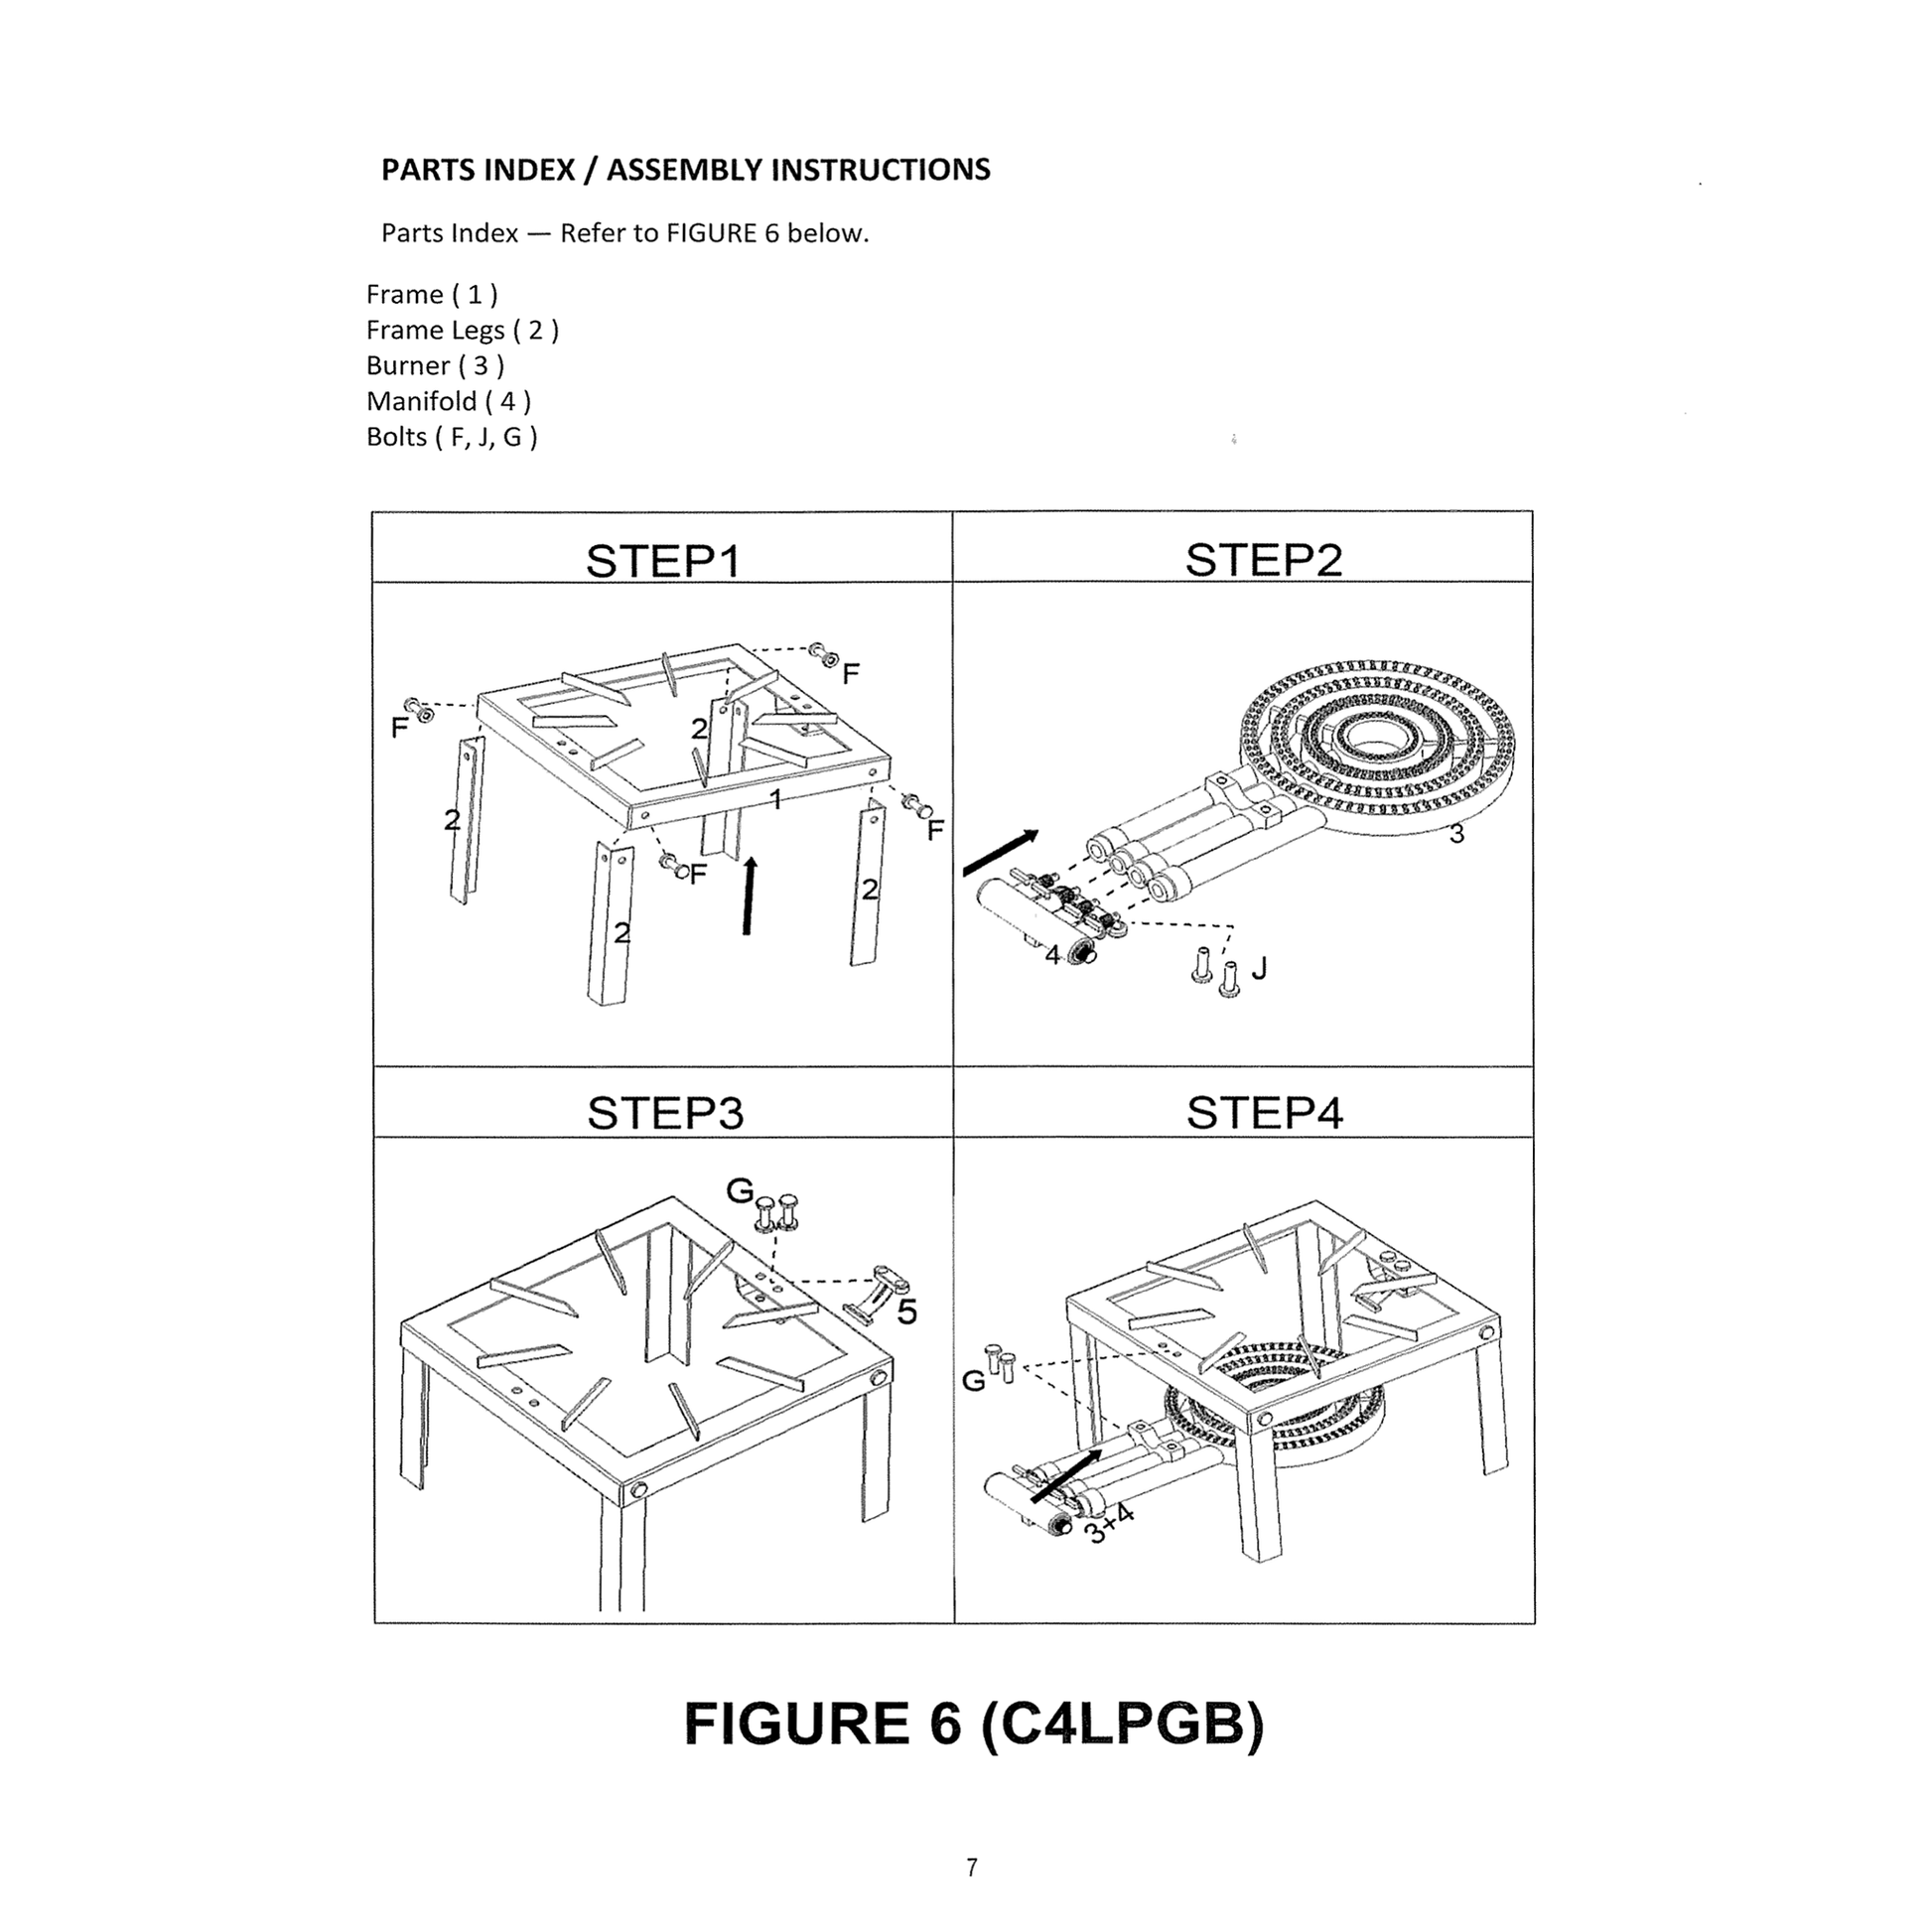 Assembly instructions for the gas burner and frame